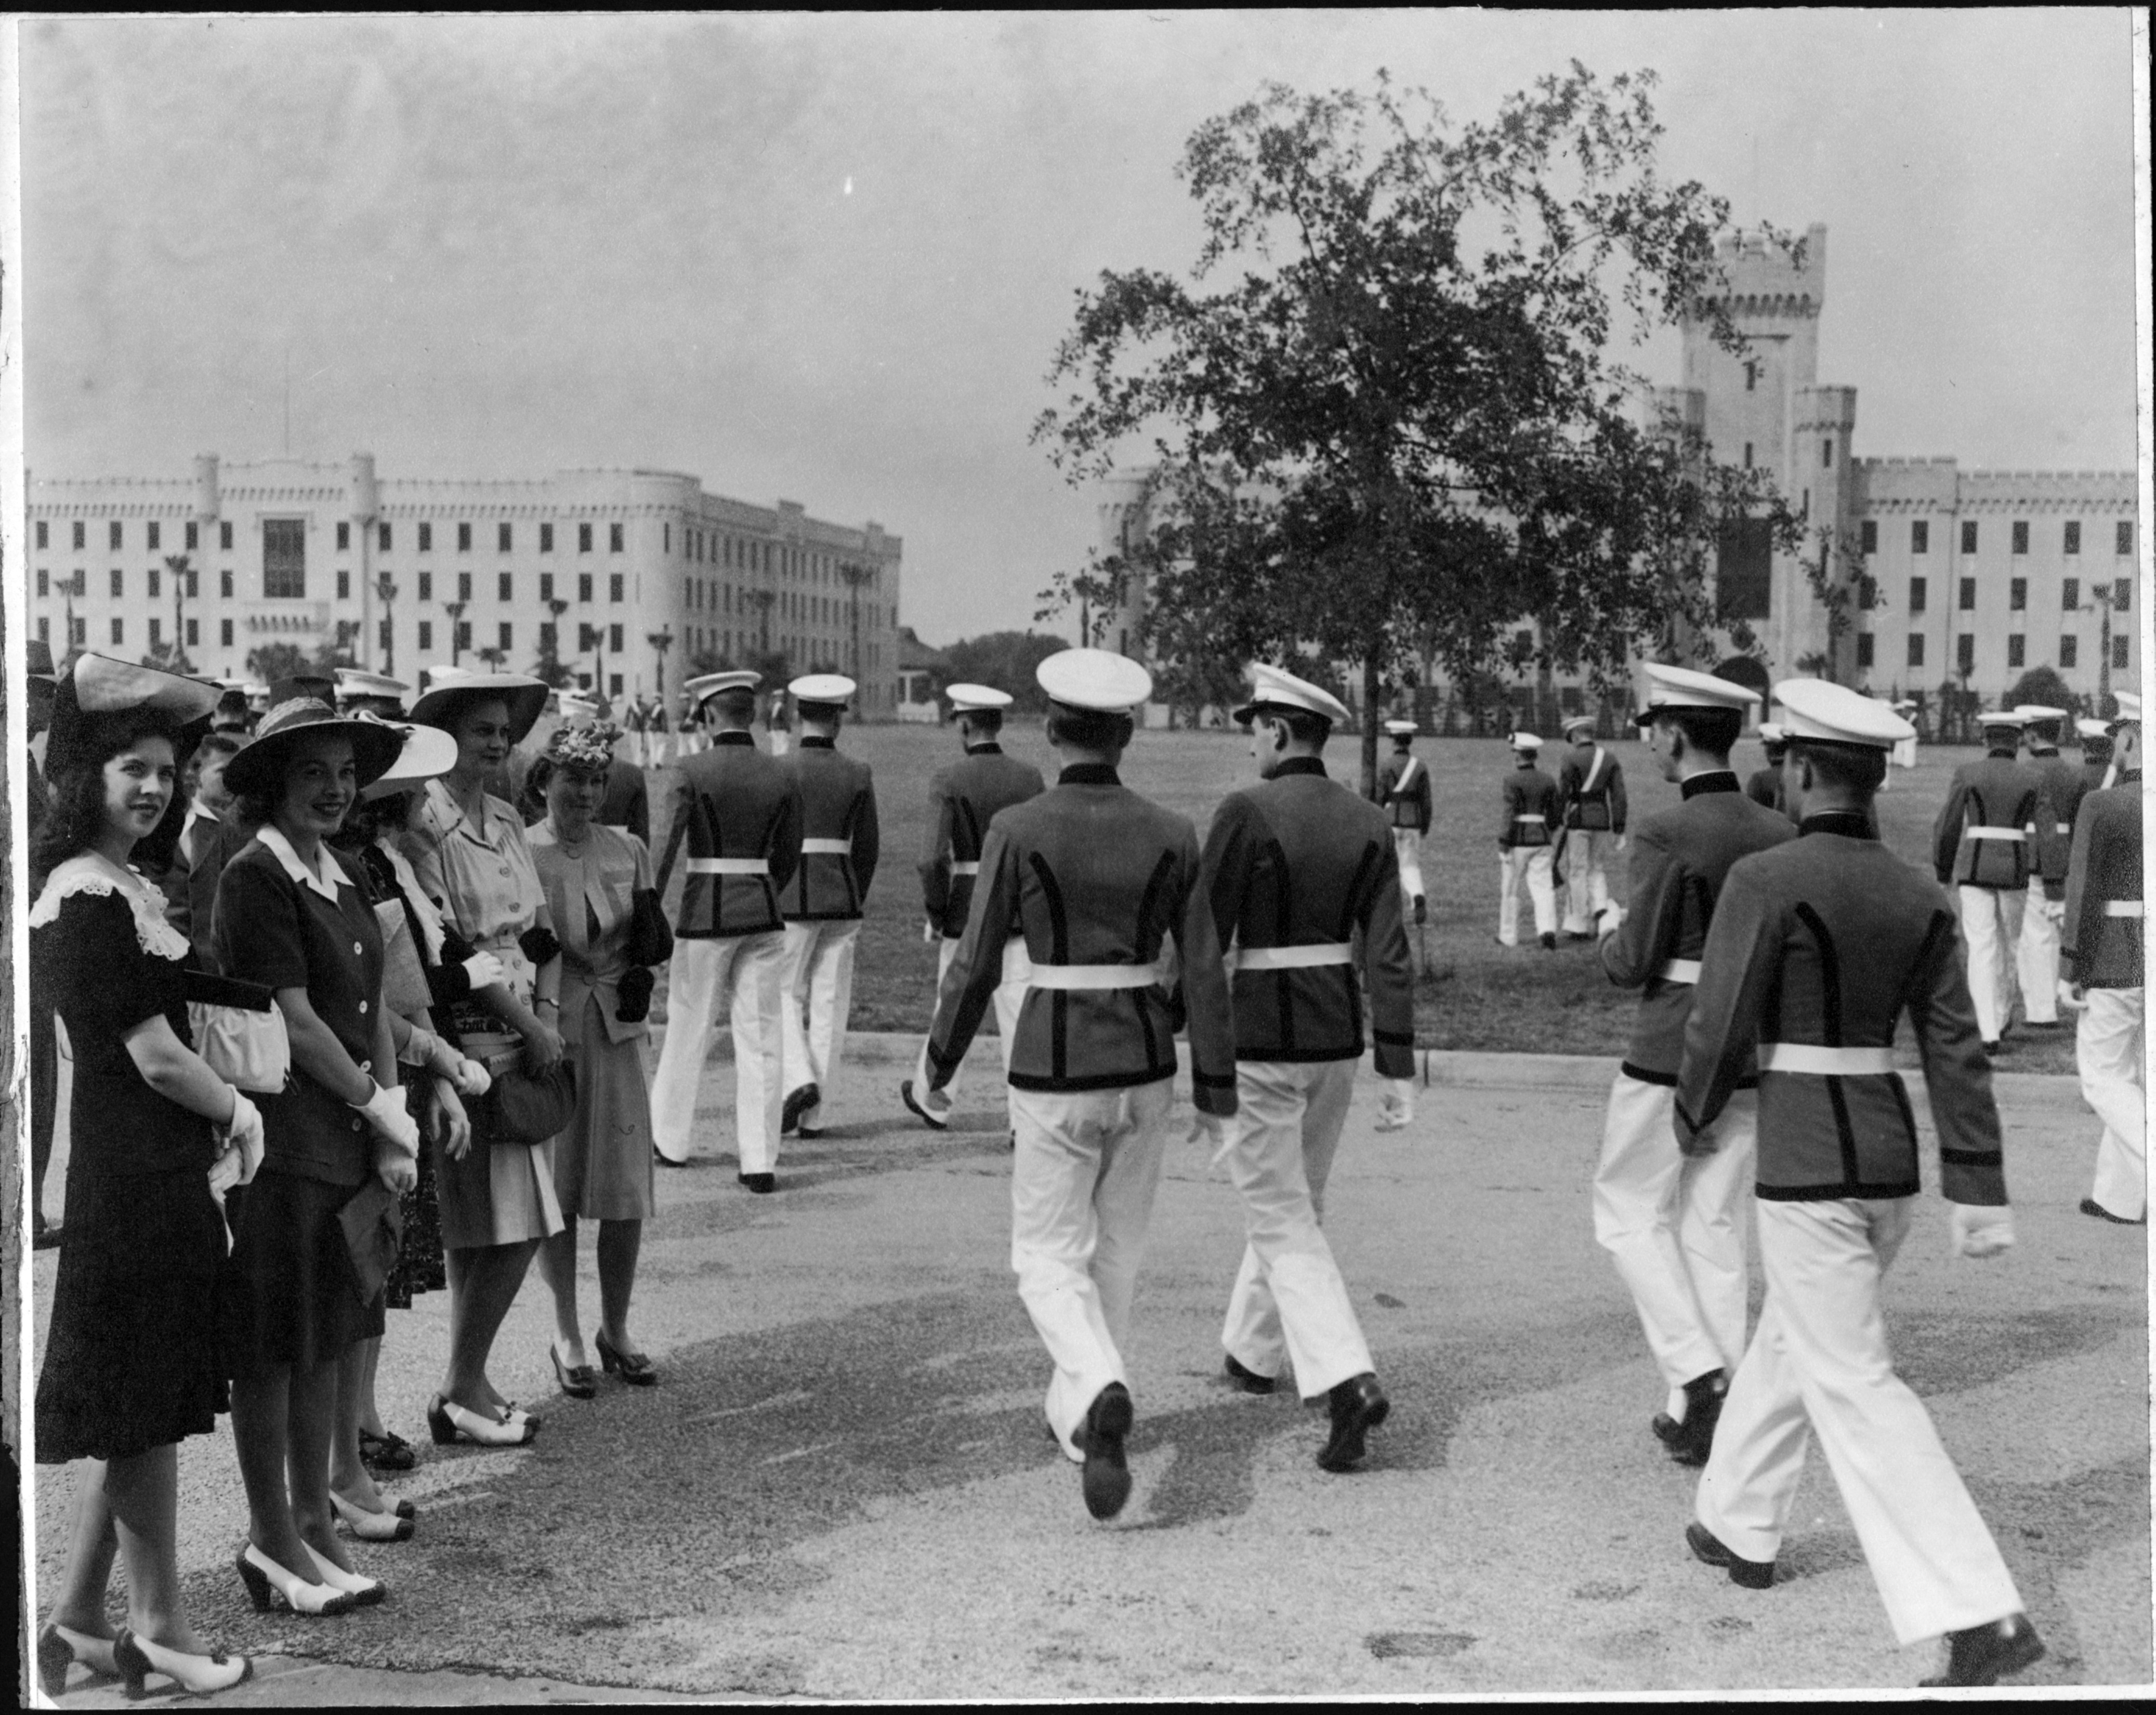 Girls visit The S.C. Corps of Cadets in 1943